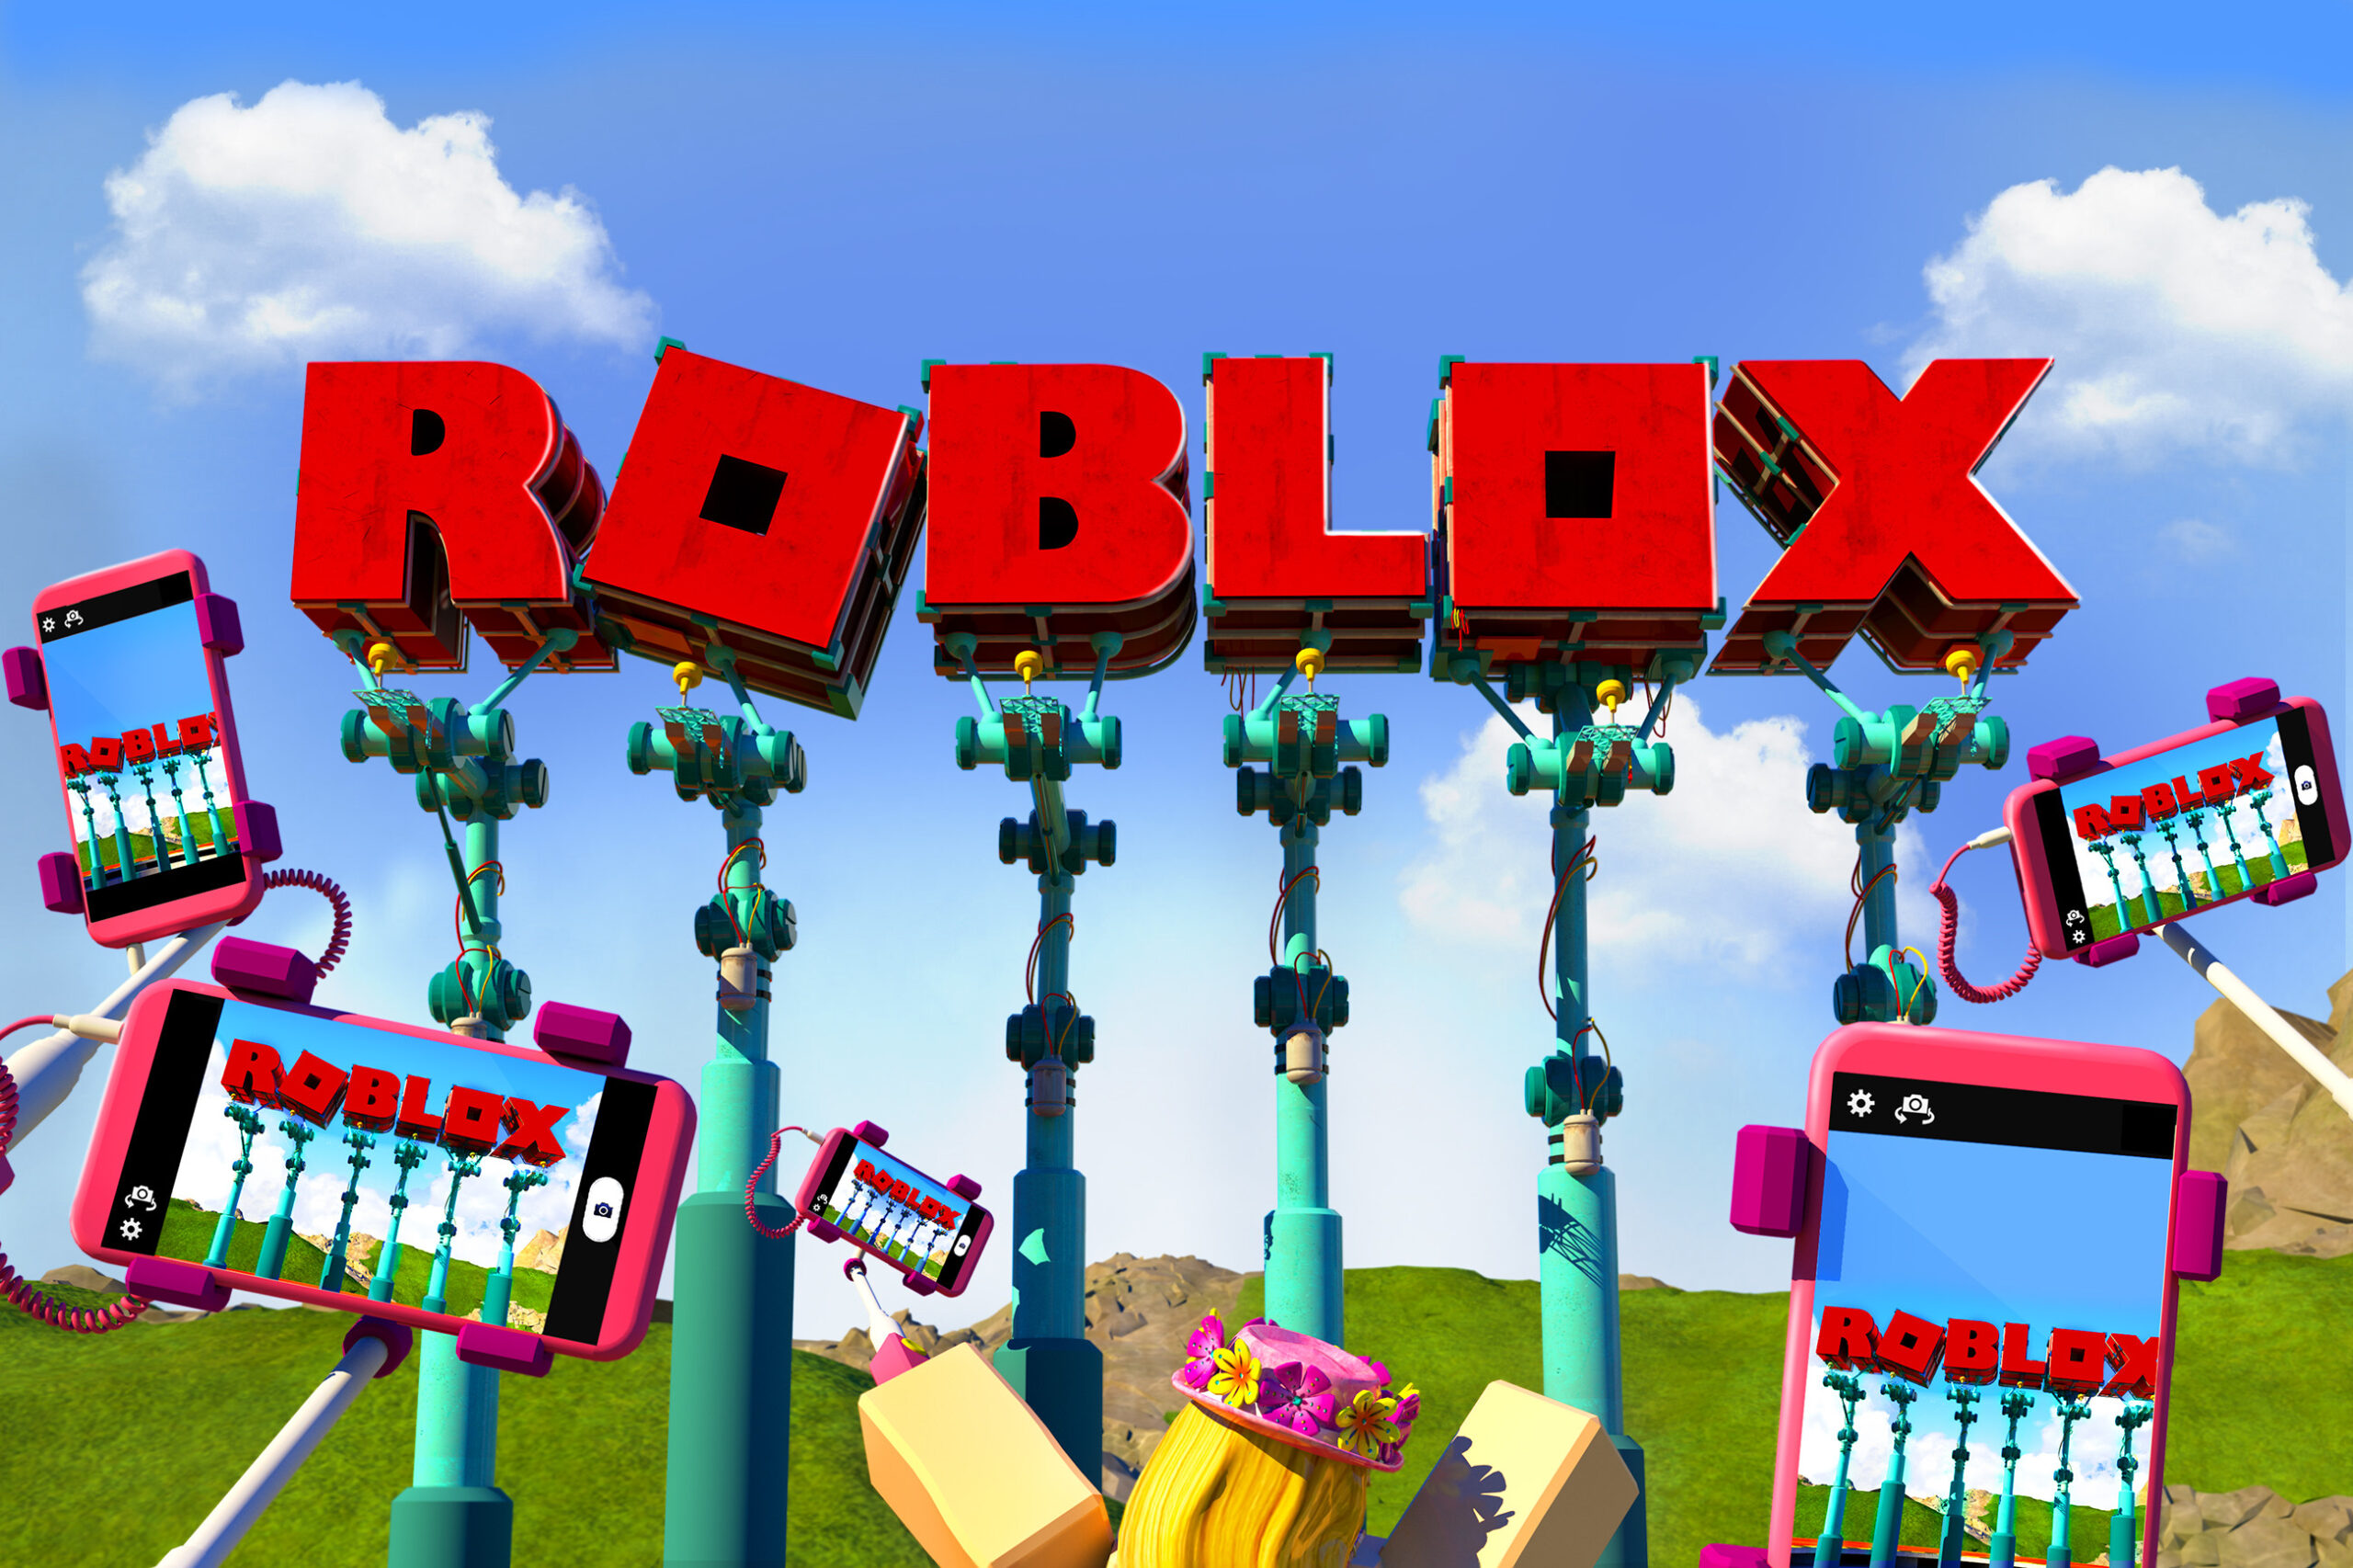 Roblox official logo scaled